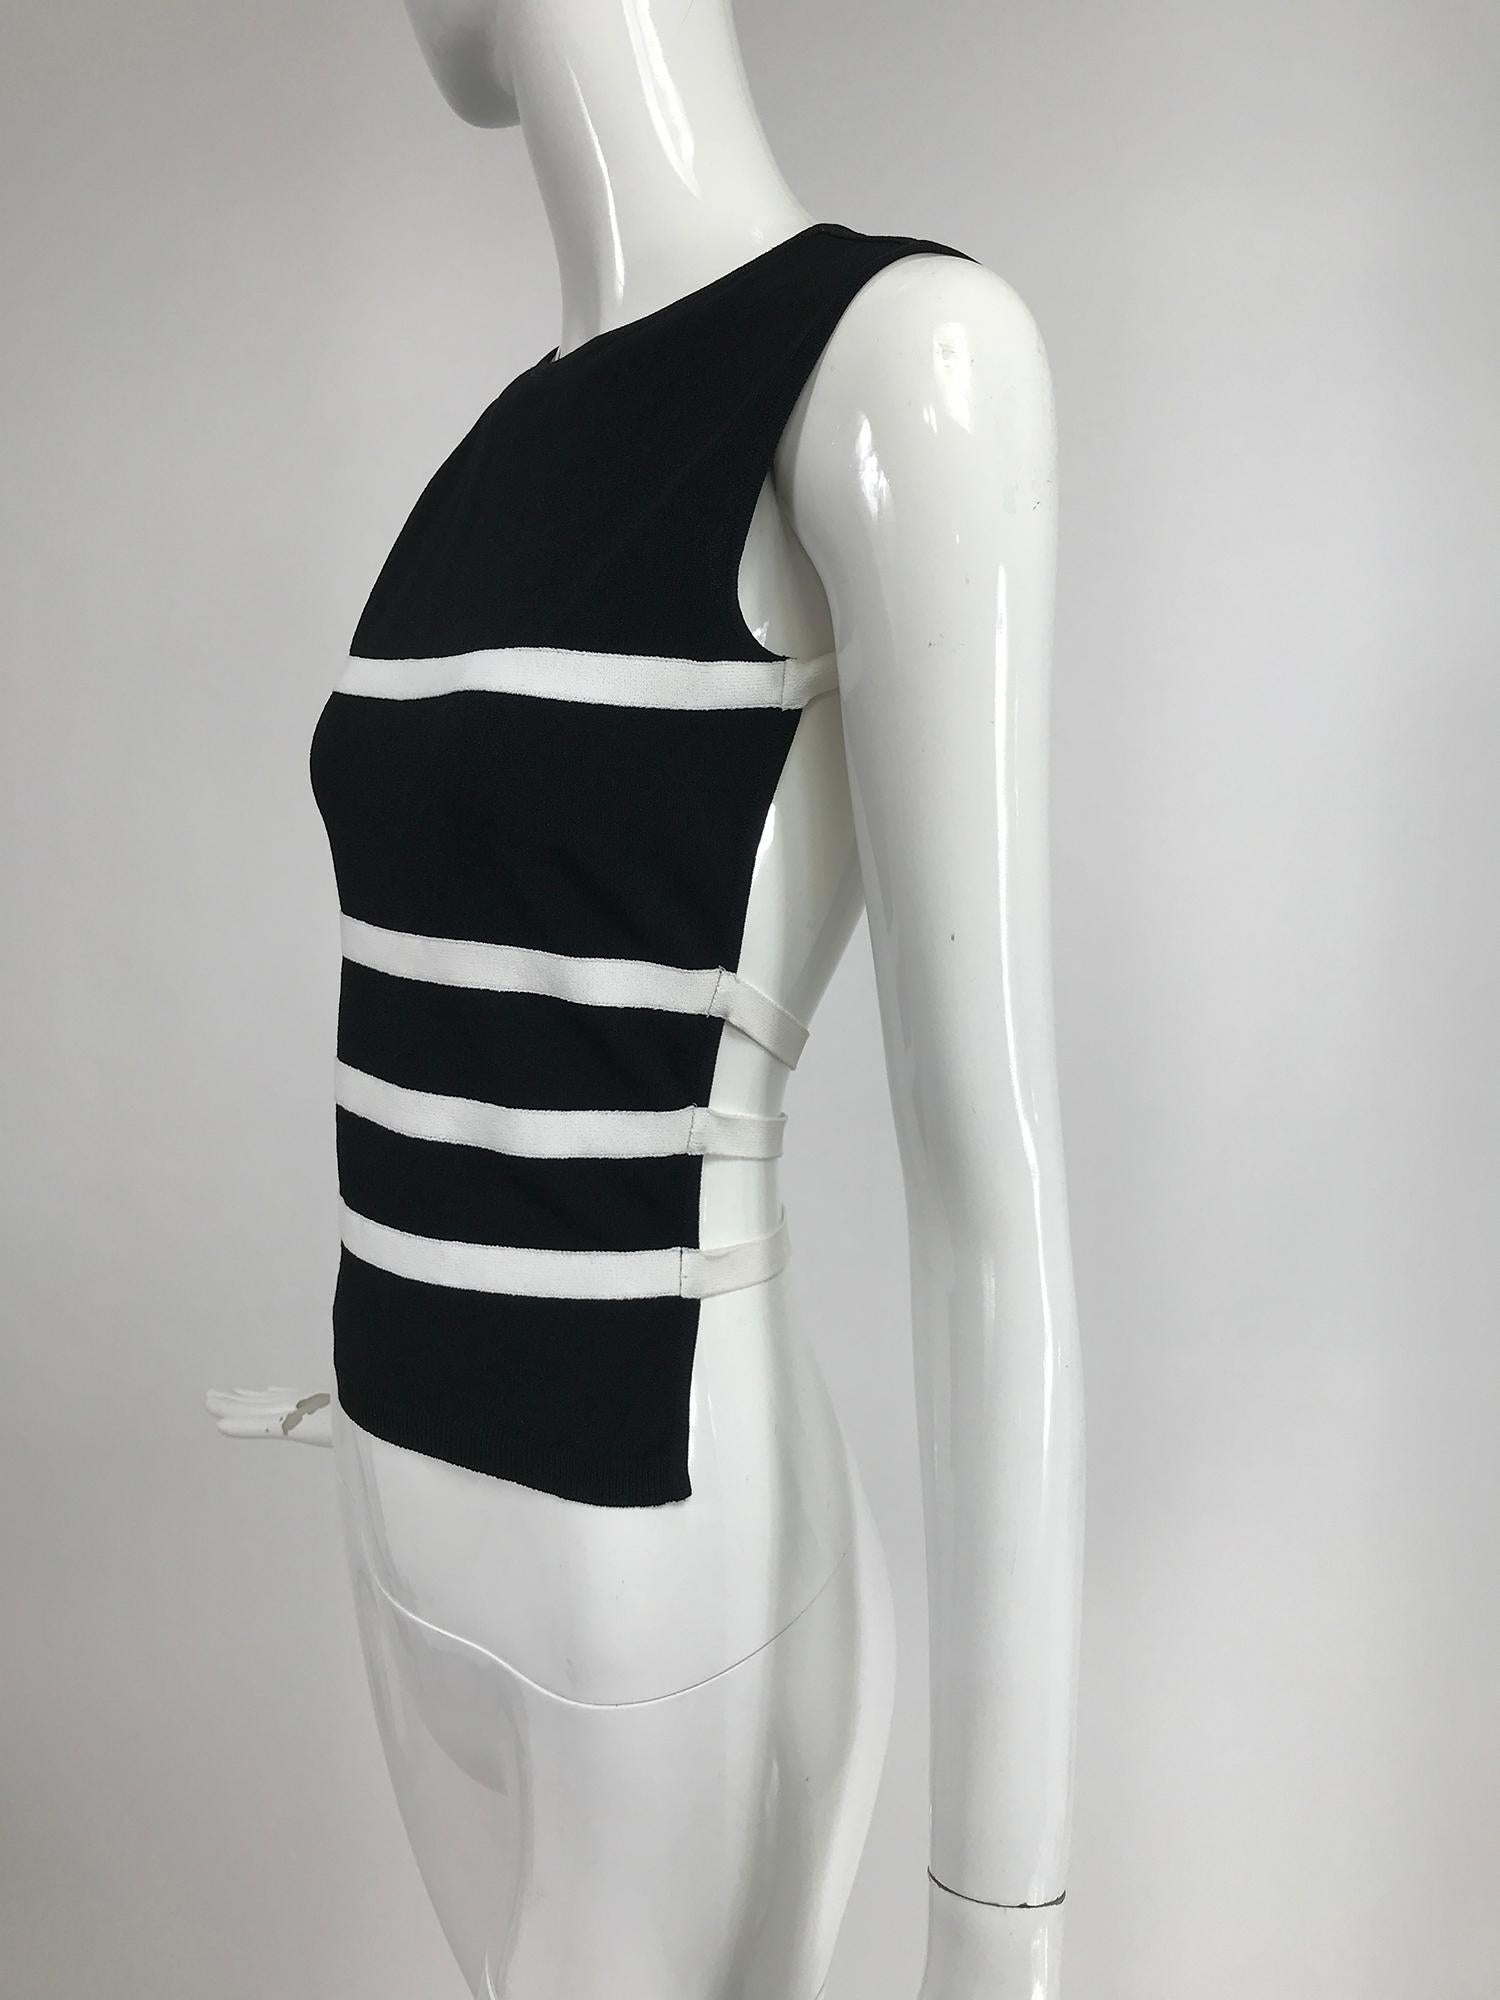 Moschino Black & White Stripe Knit Bare Back Top In Good Condition In West Palm Beach, FL